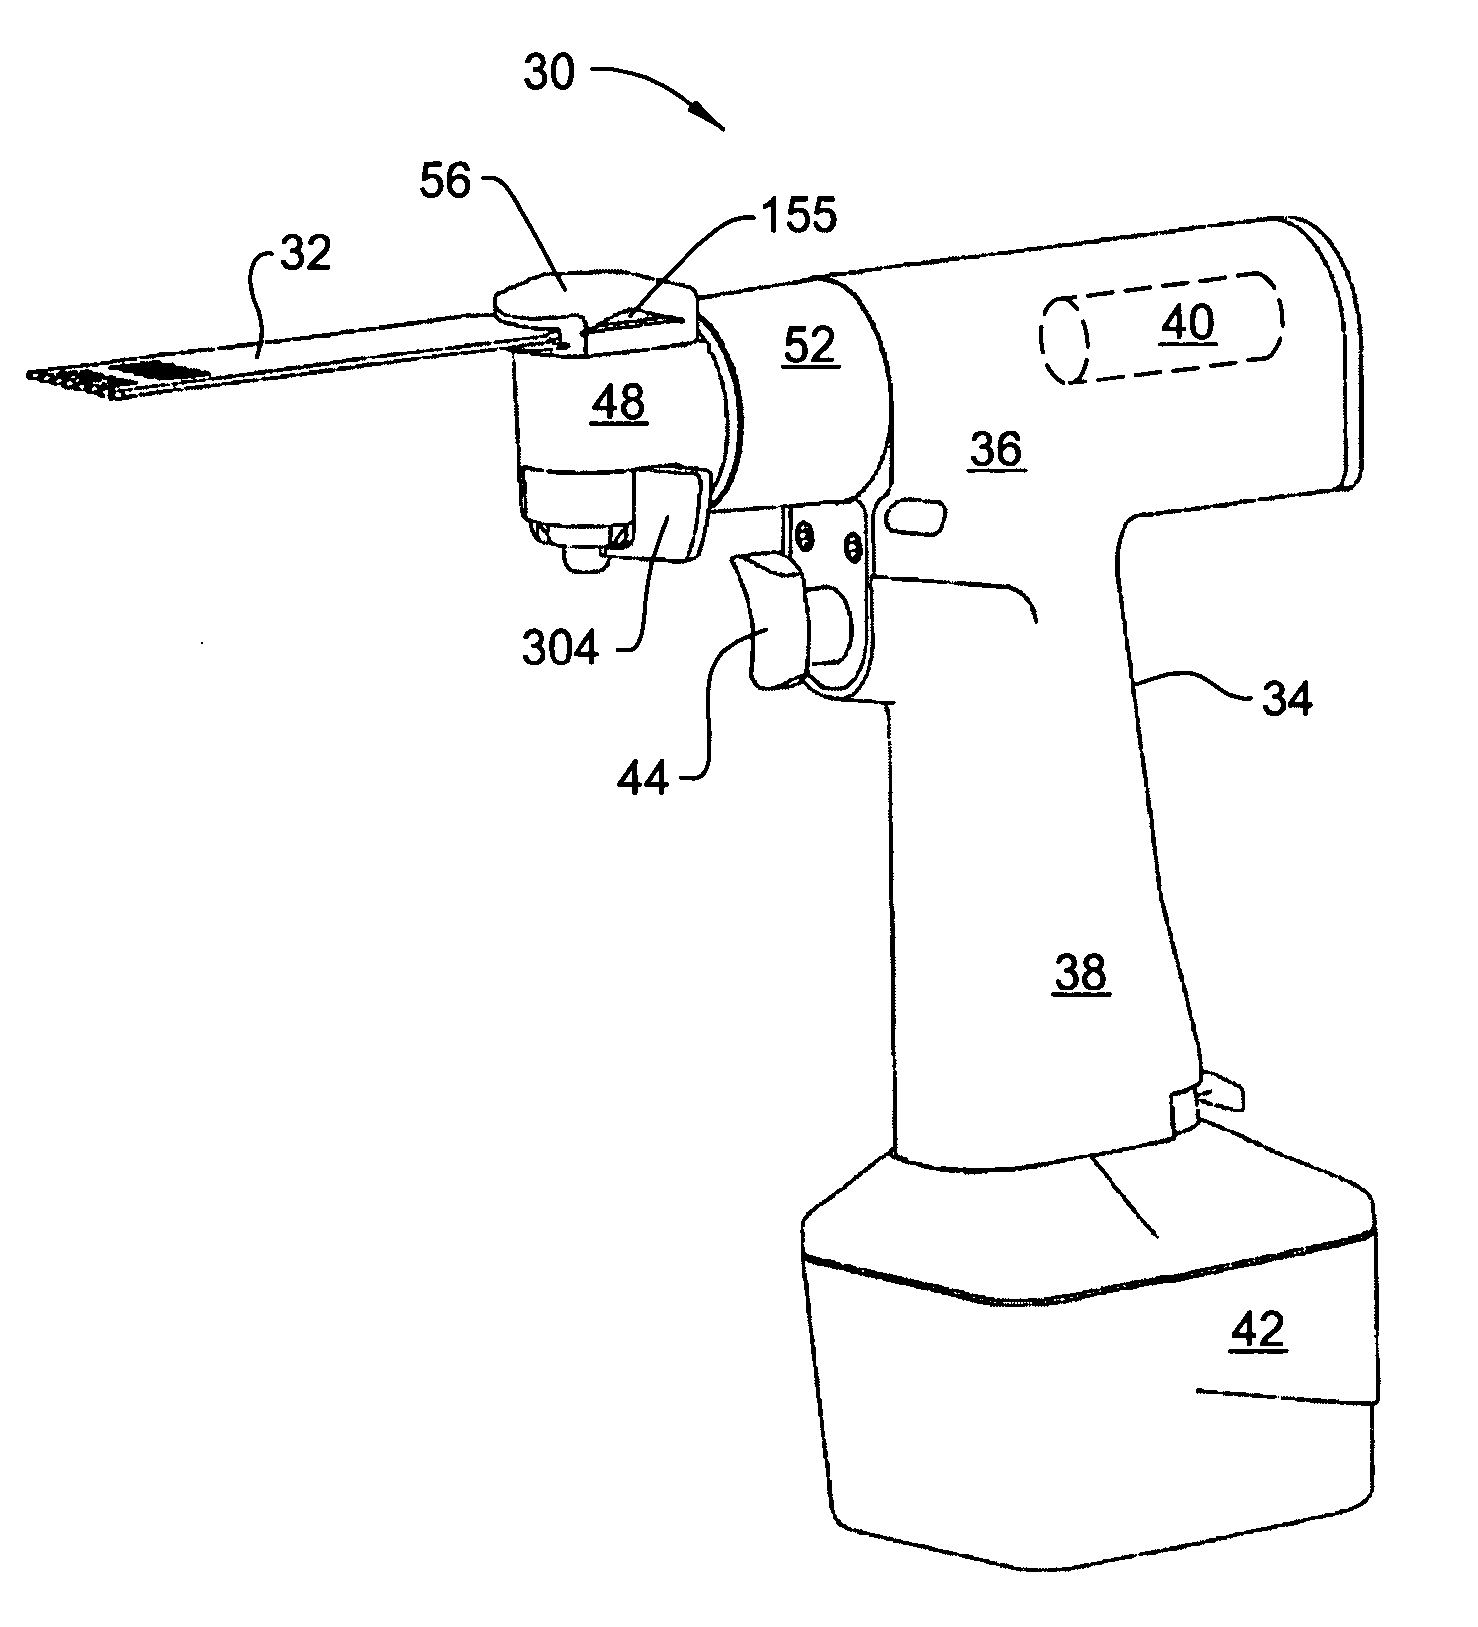 Surgical sagittal saw with quick release indexing head and low blade-slap coupling assembly